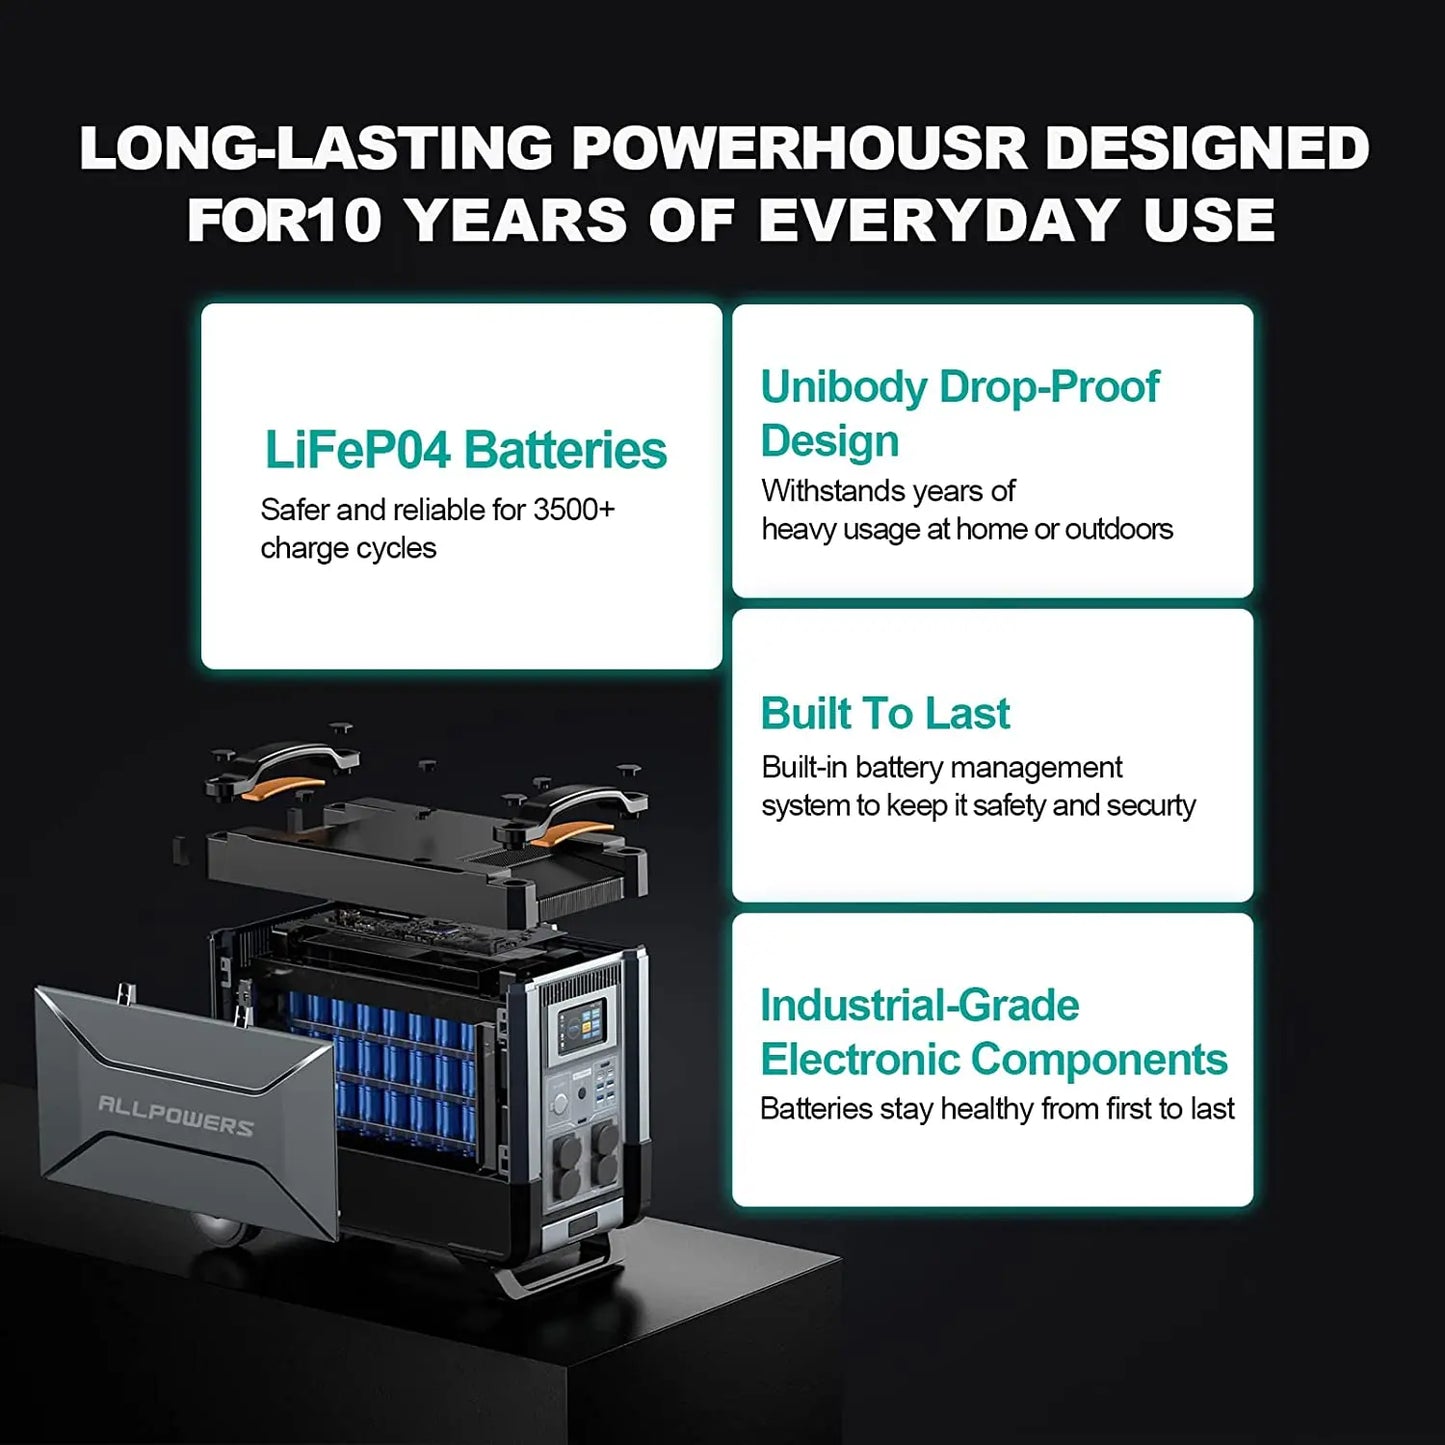 ALLPOWERS R4000 LiFePO4 Battery, 3600Wh Power Station 4000W Portable Generator, Expandable Battery for Power Outage, Travel，UPS